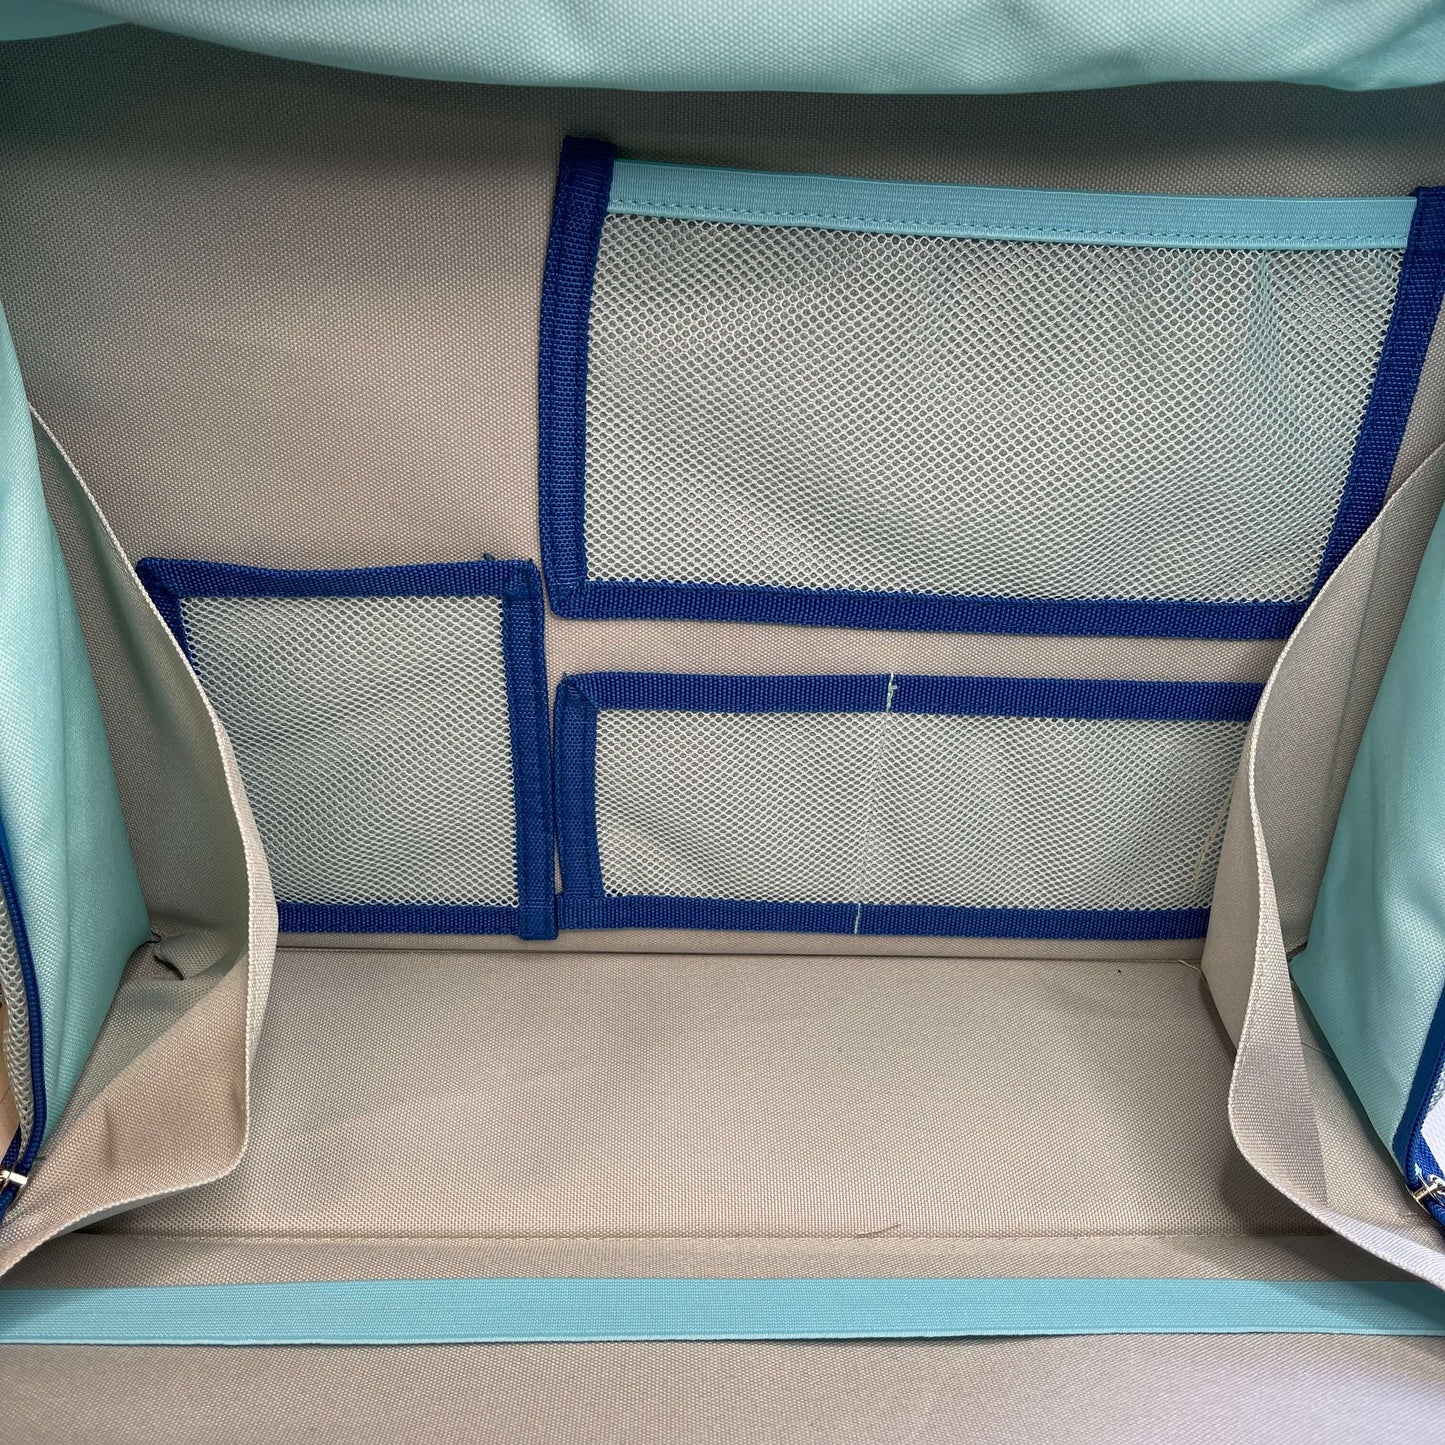 Inside view of kids activity satchel showing the range of pockets.